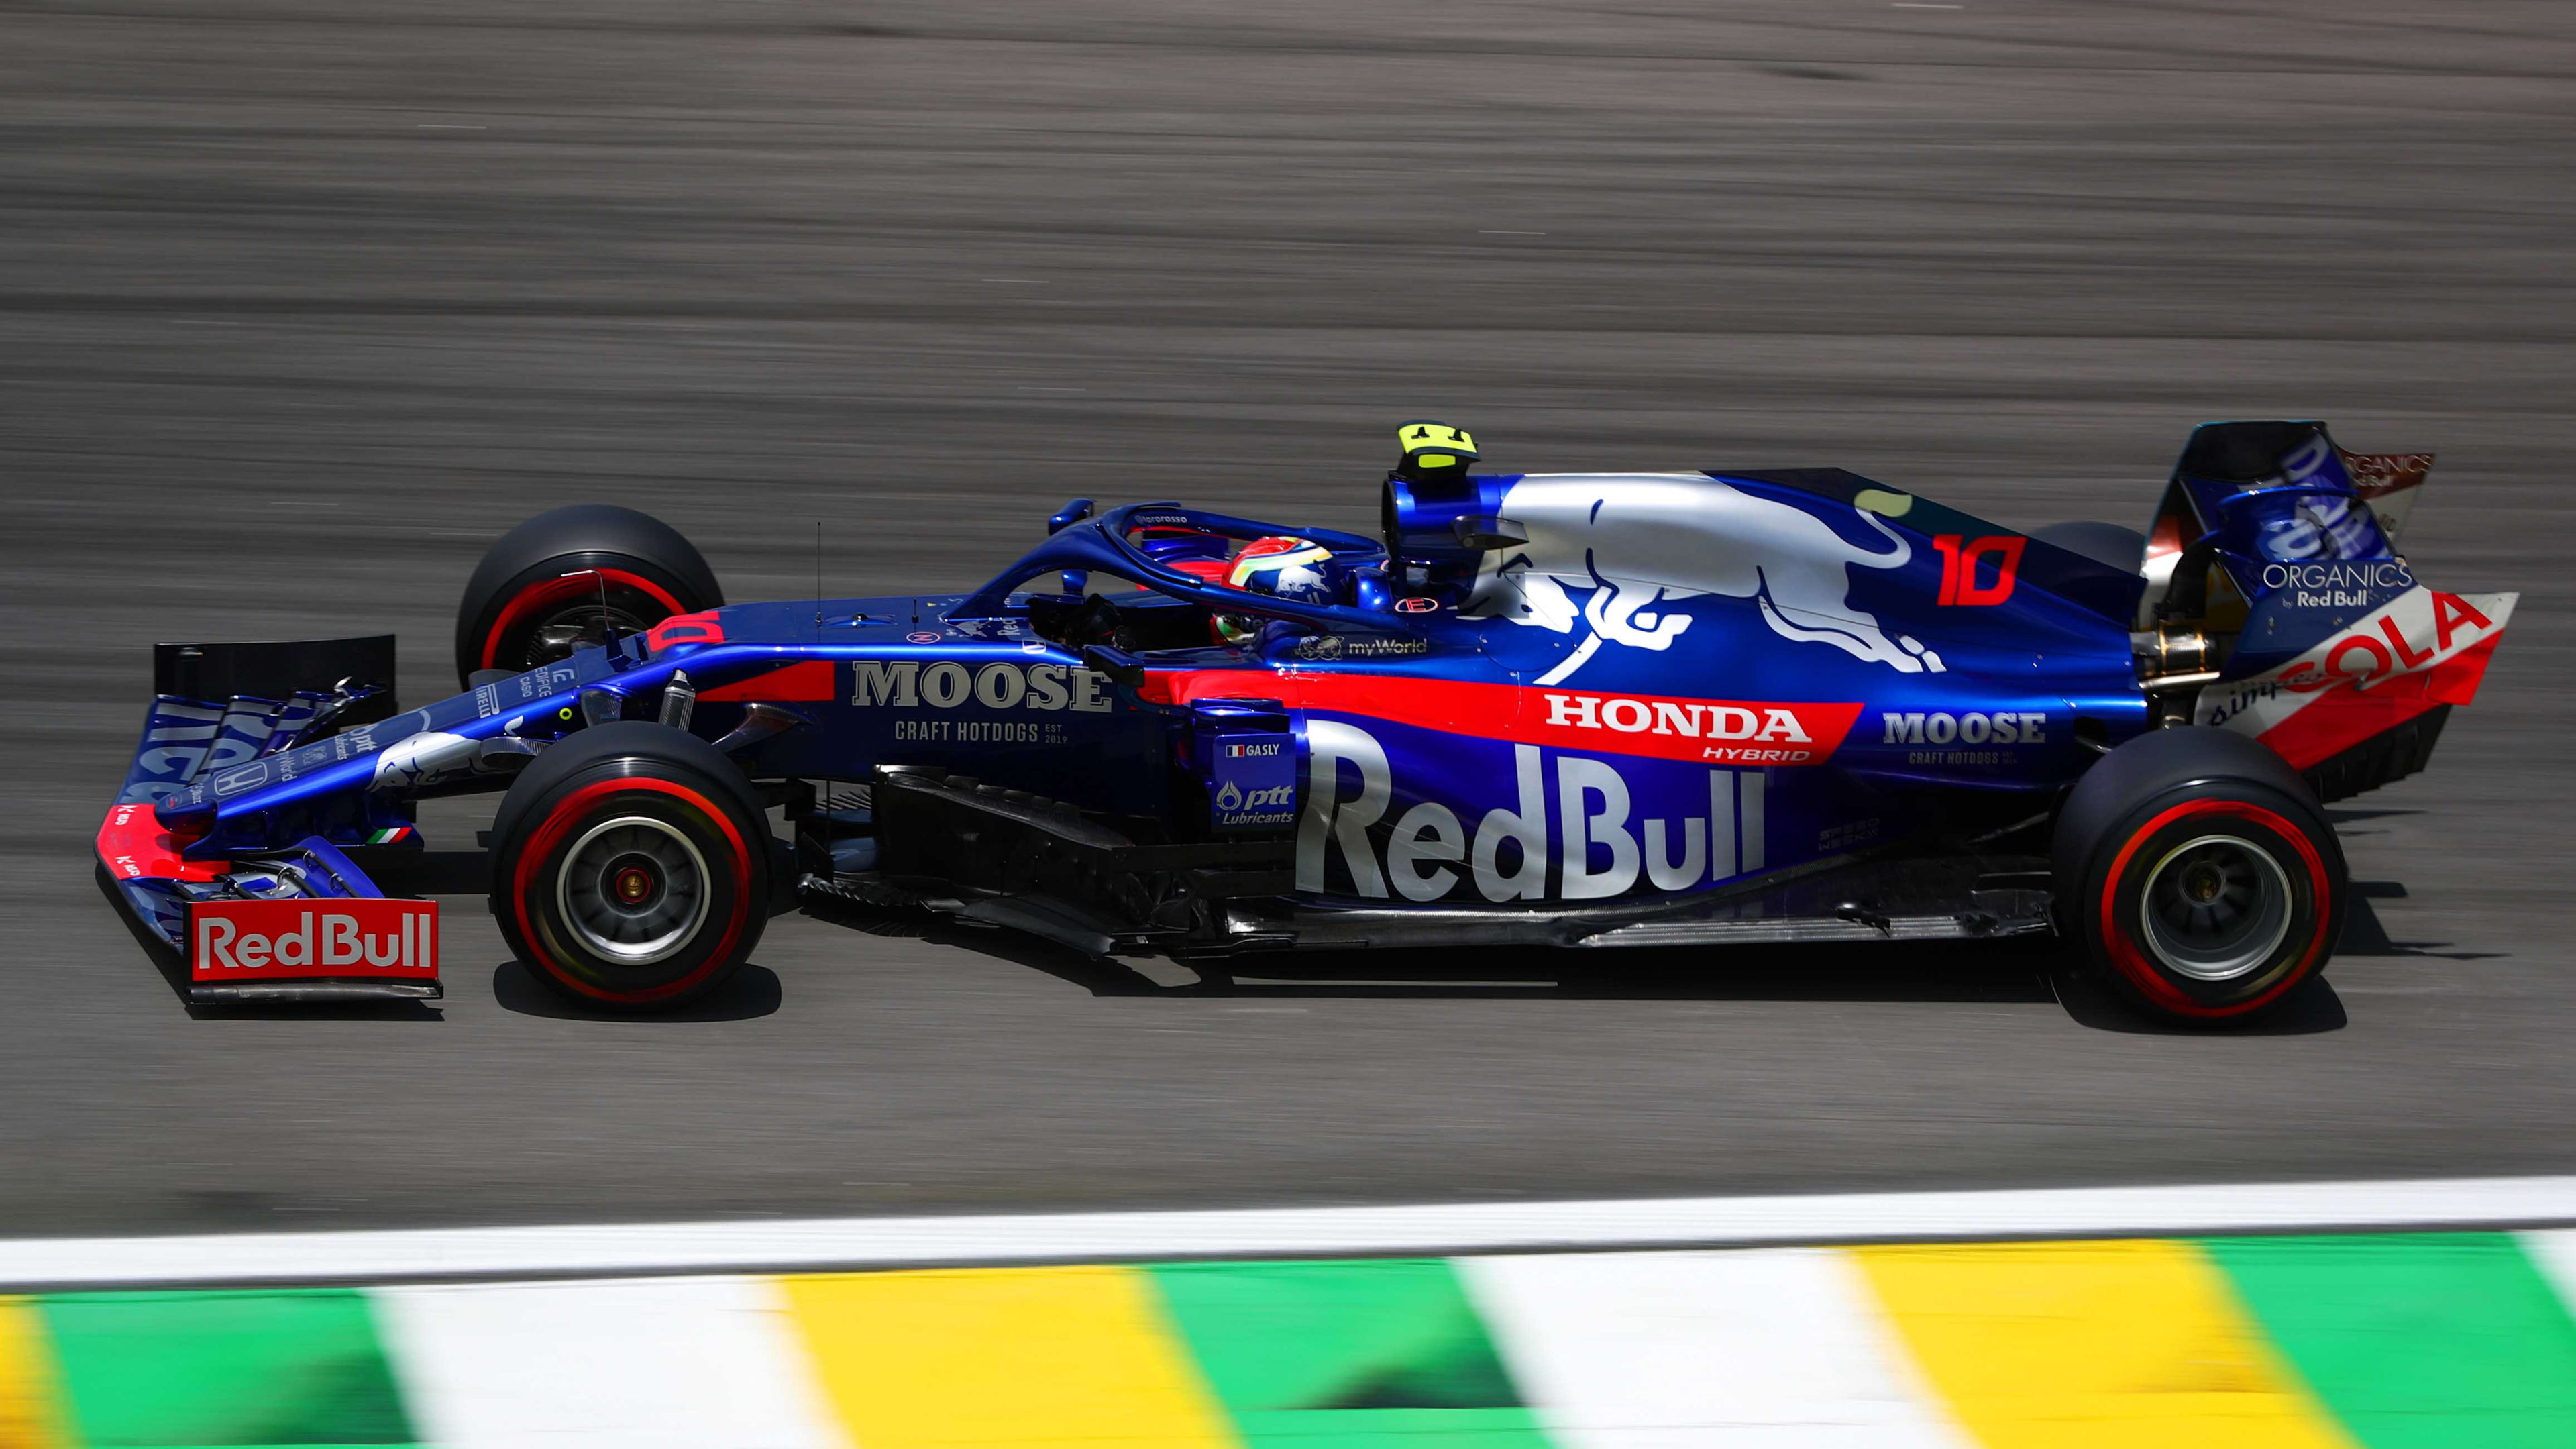 Grand Prix 2019: Gasly excited by race after equalling Toro Rosso's best grid slot of 2019 | Formula 1®